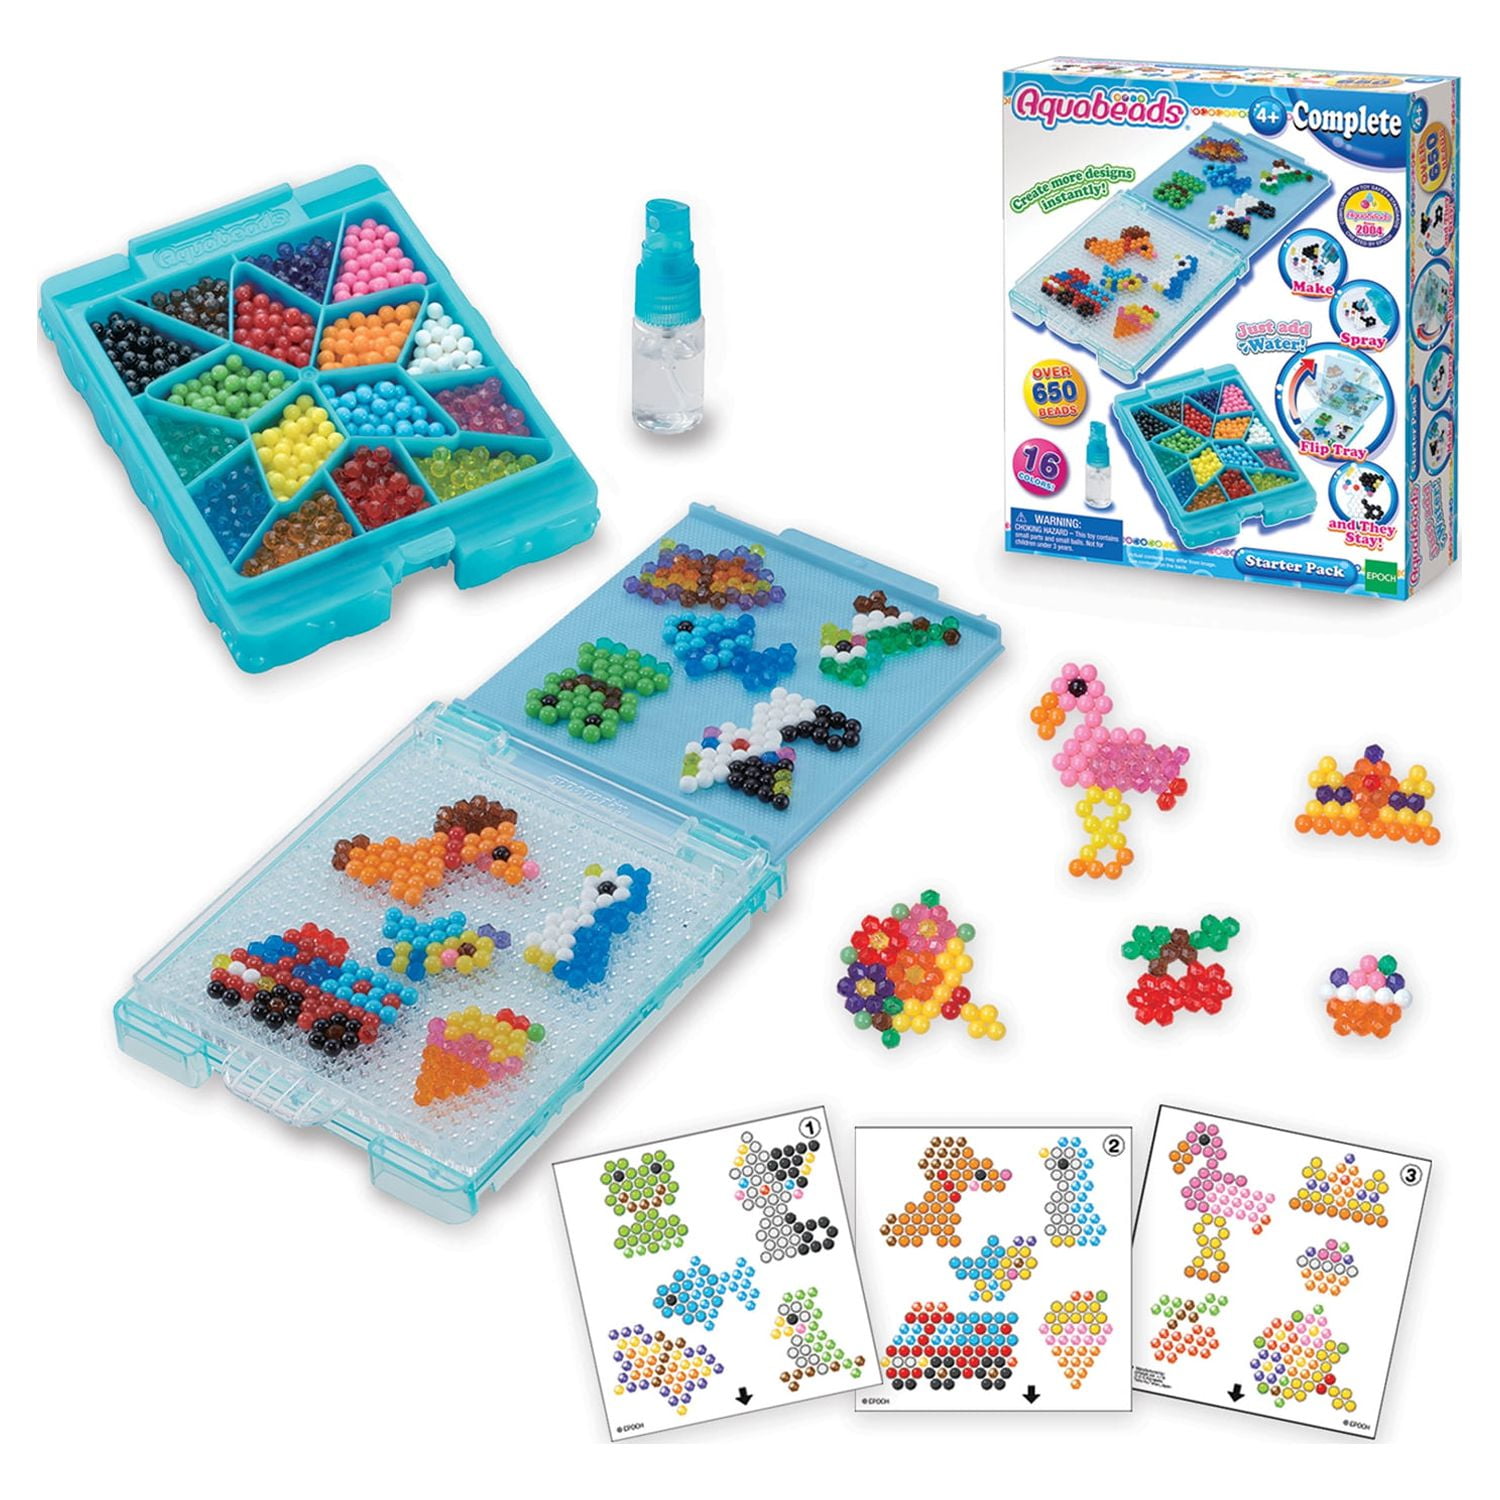 Aquabeads Disney Frozen Play Pack, Complete Arts & Crafts Bead Kit